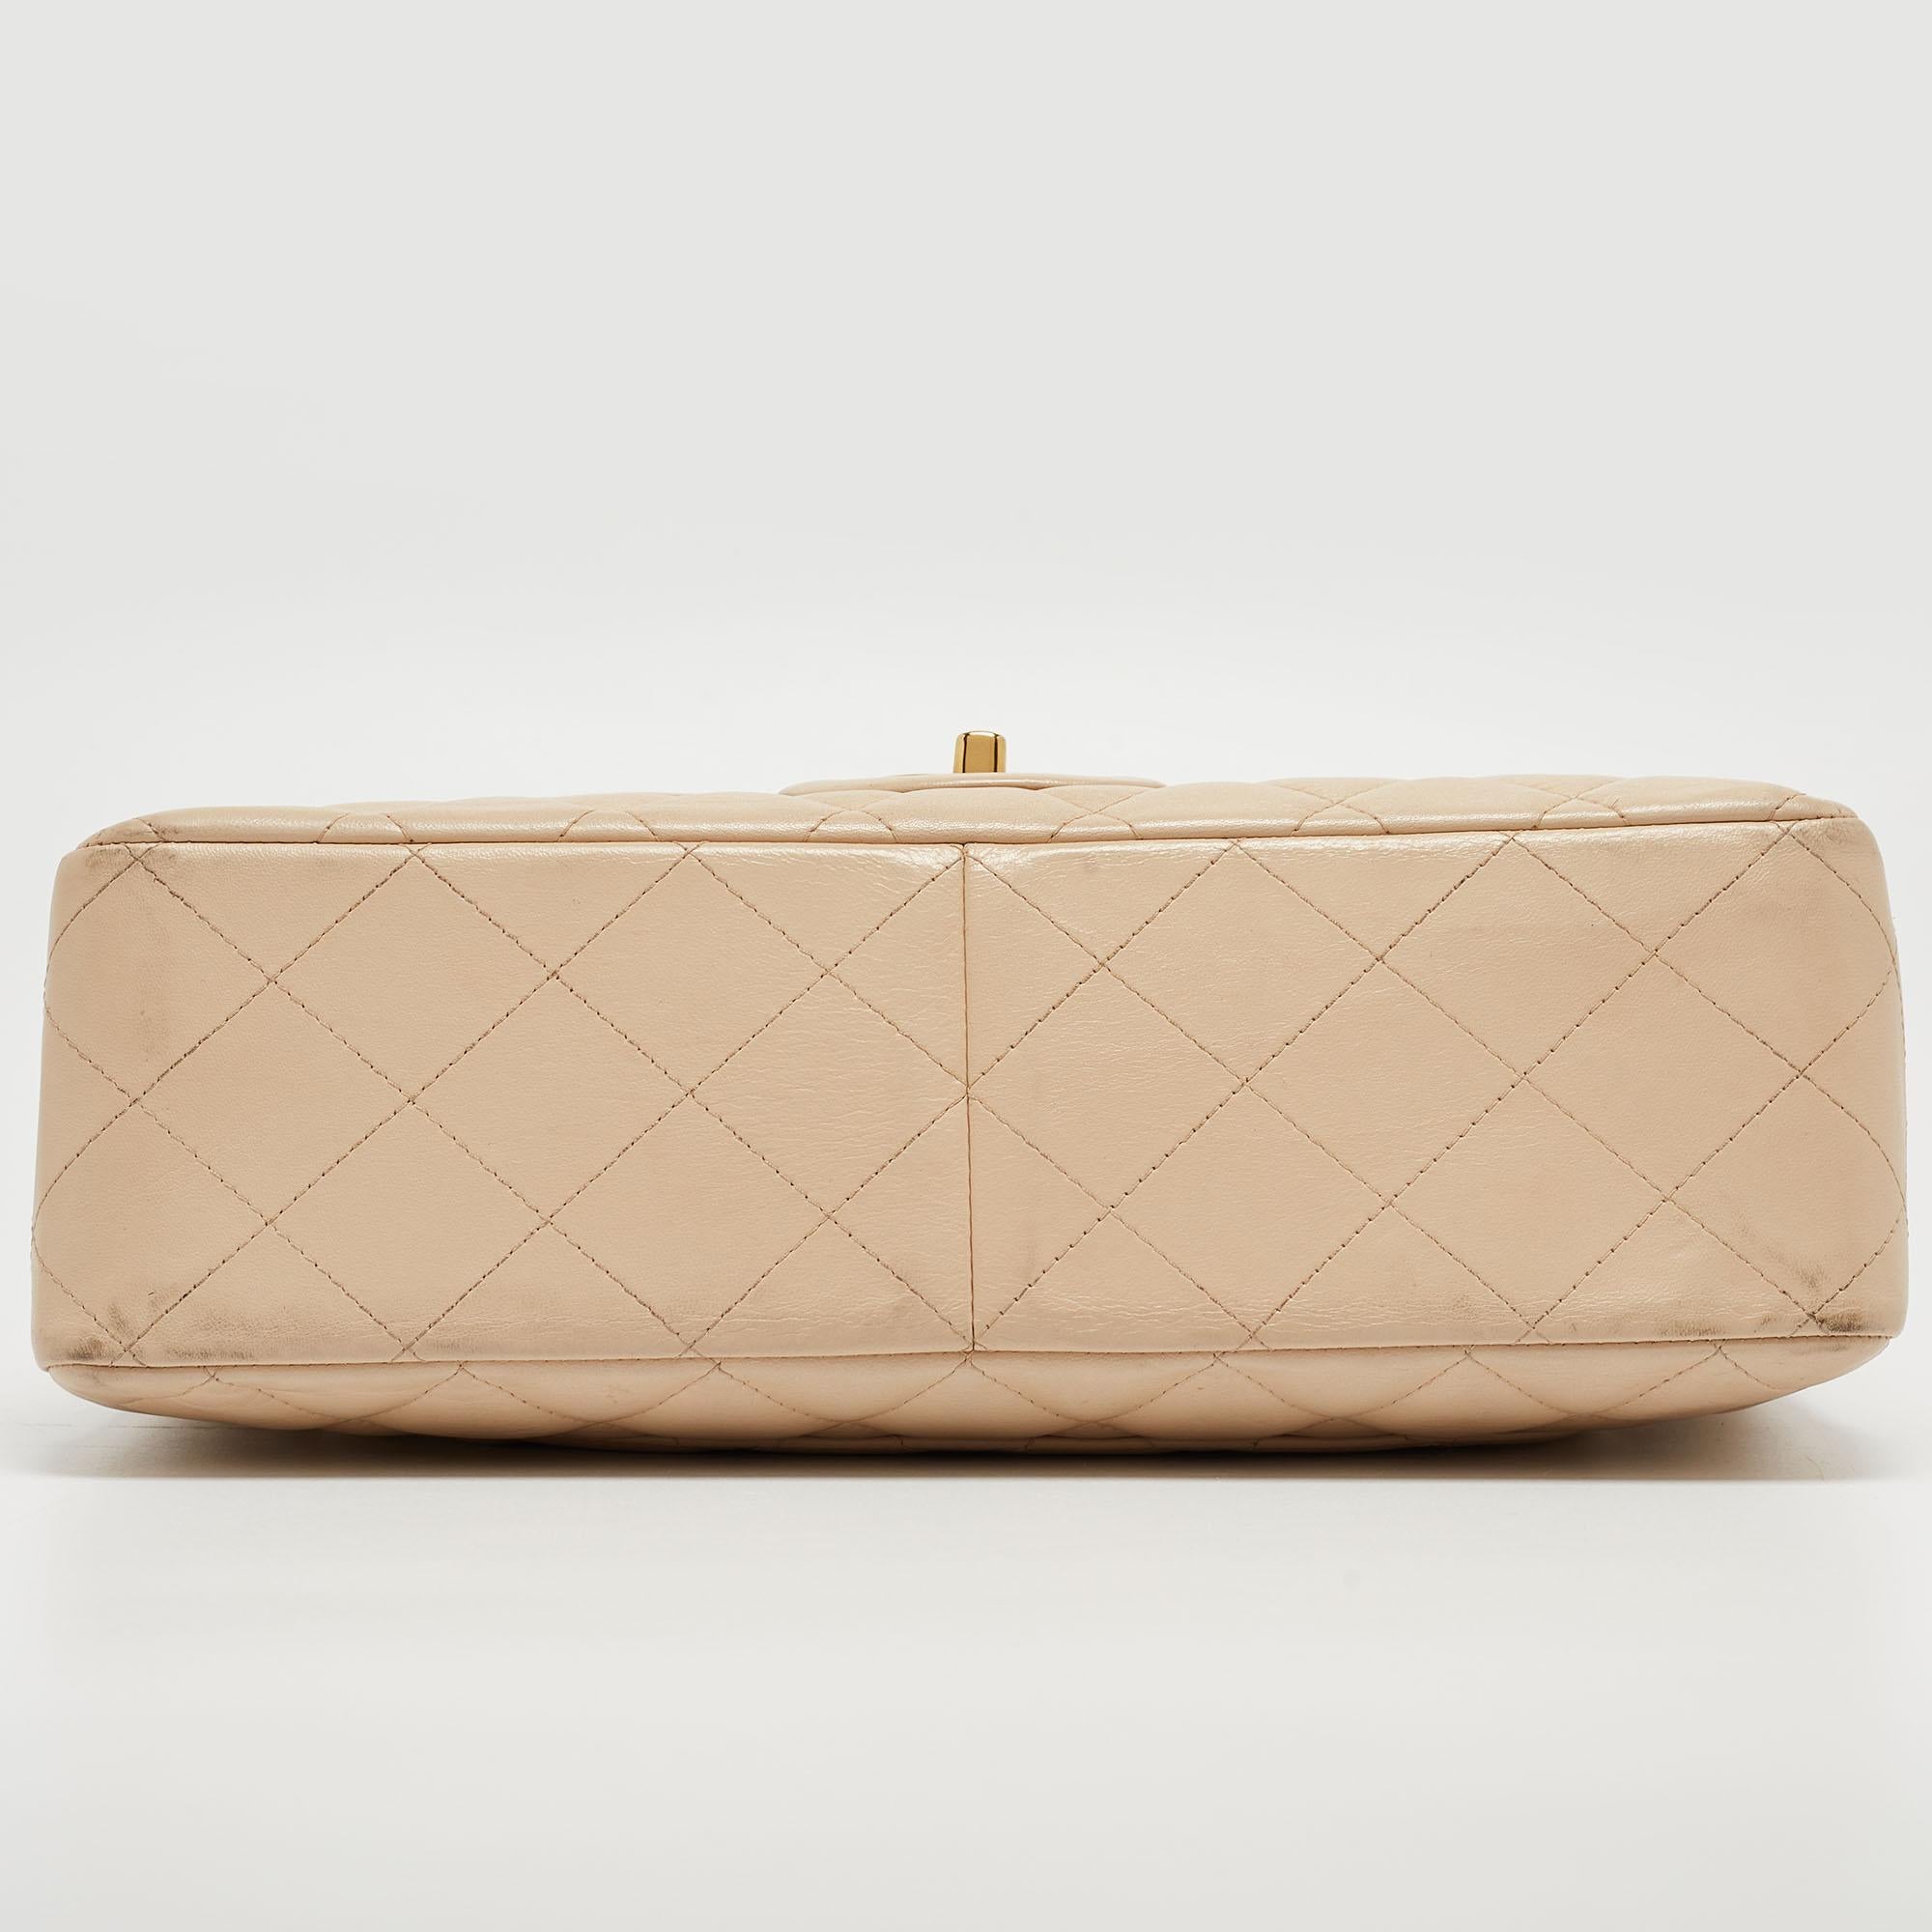 Chanel Beige Quilted Leather Jumbo Classic Single Flap Bag 1